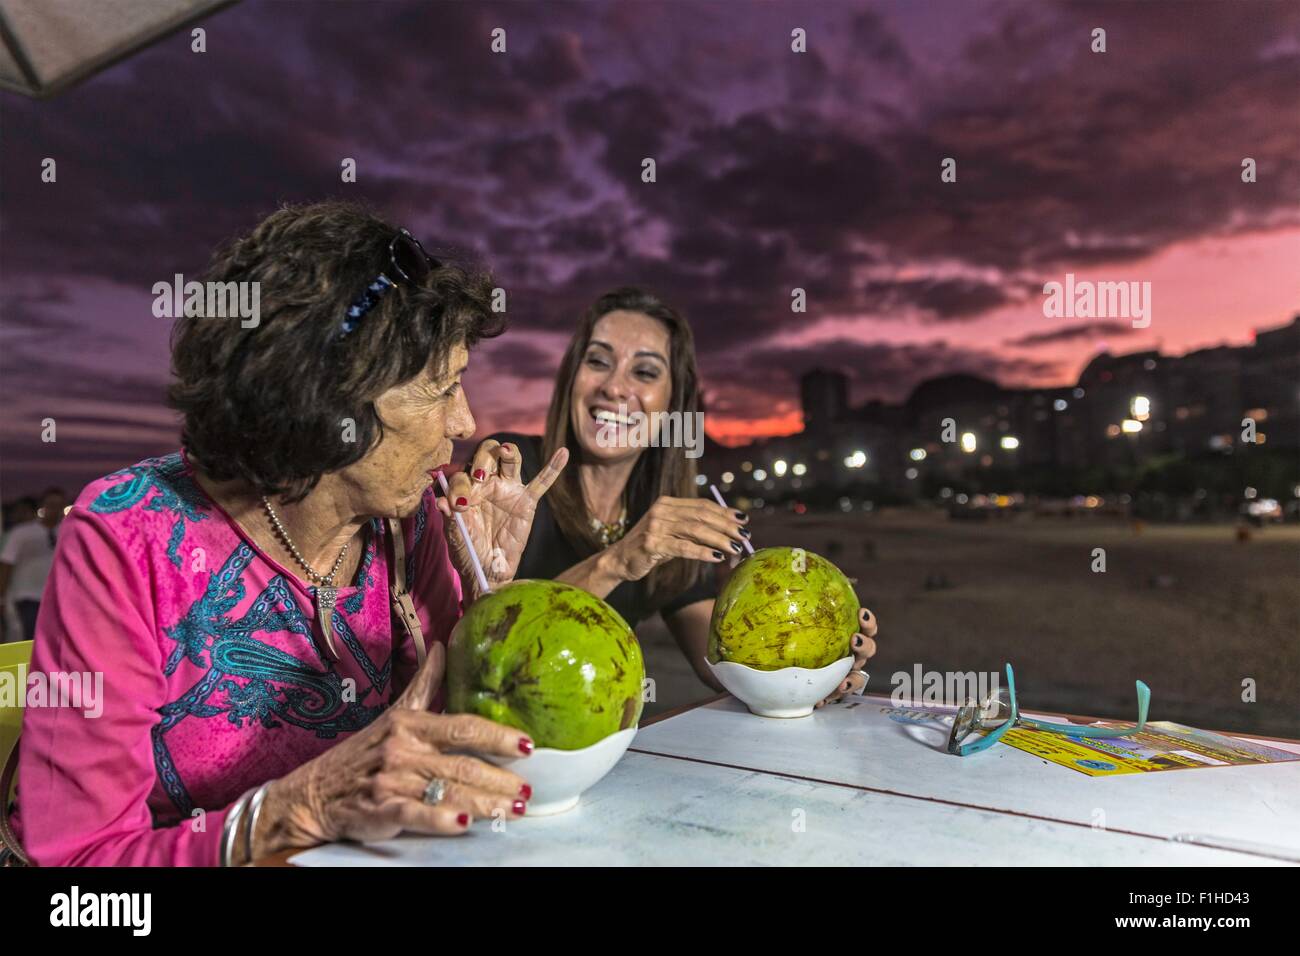 Mature woman and mother drinking from coconut shells at beach at night, Copacabana, Rio de Janeiro, Brazil Stock Photo